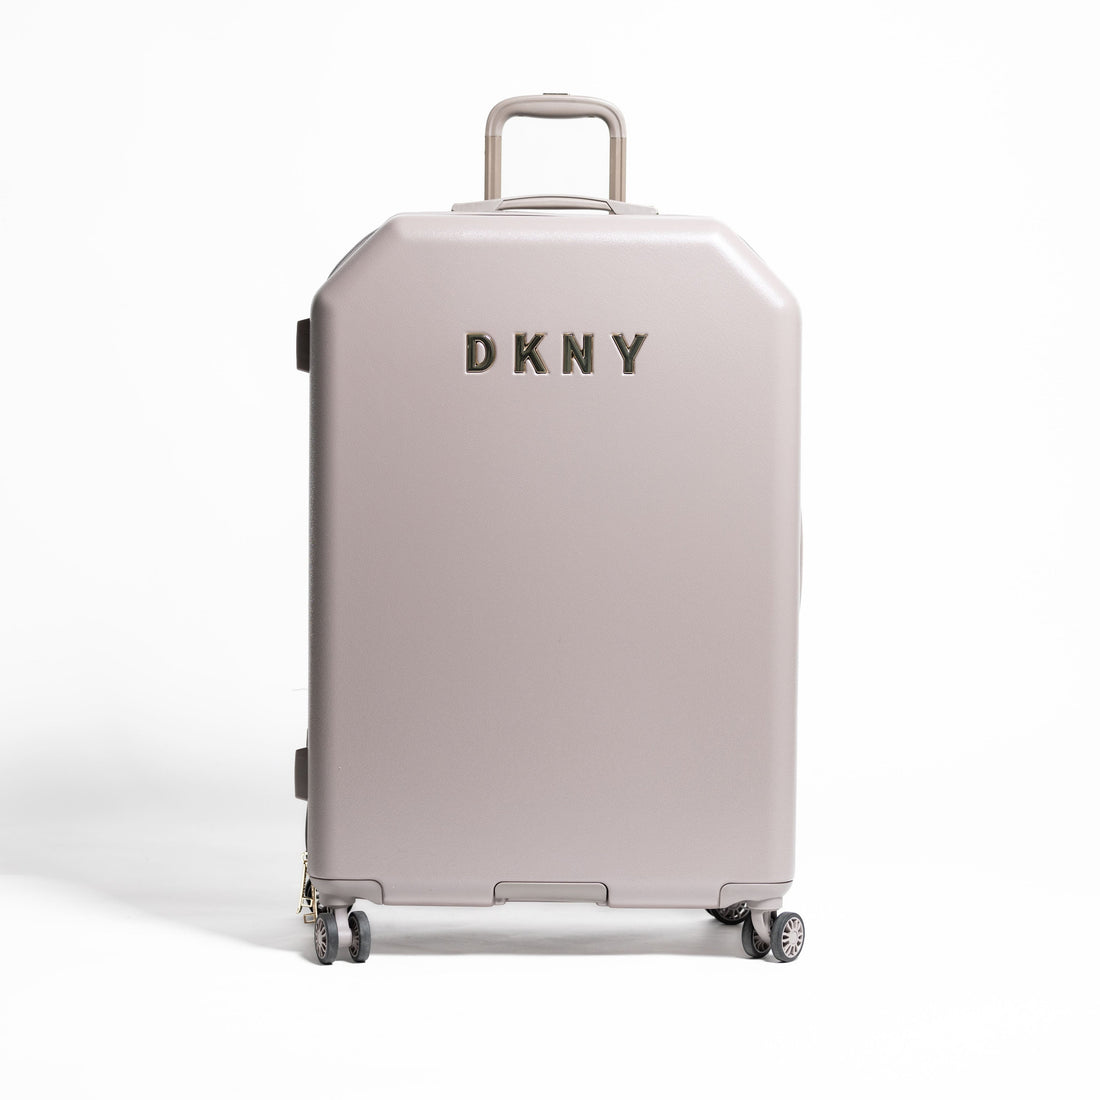 DKNY Clay Large Luggage_DH818ML7_CLY_01